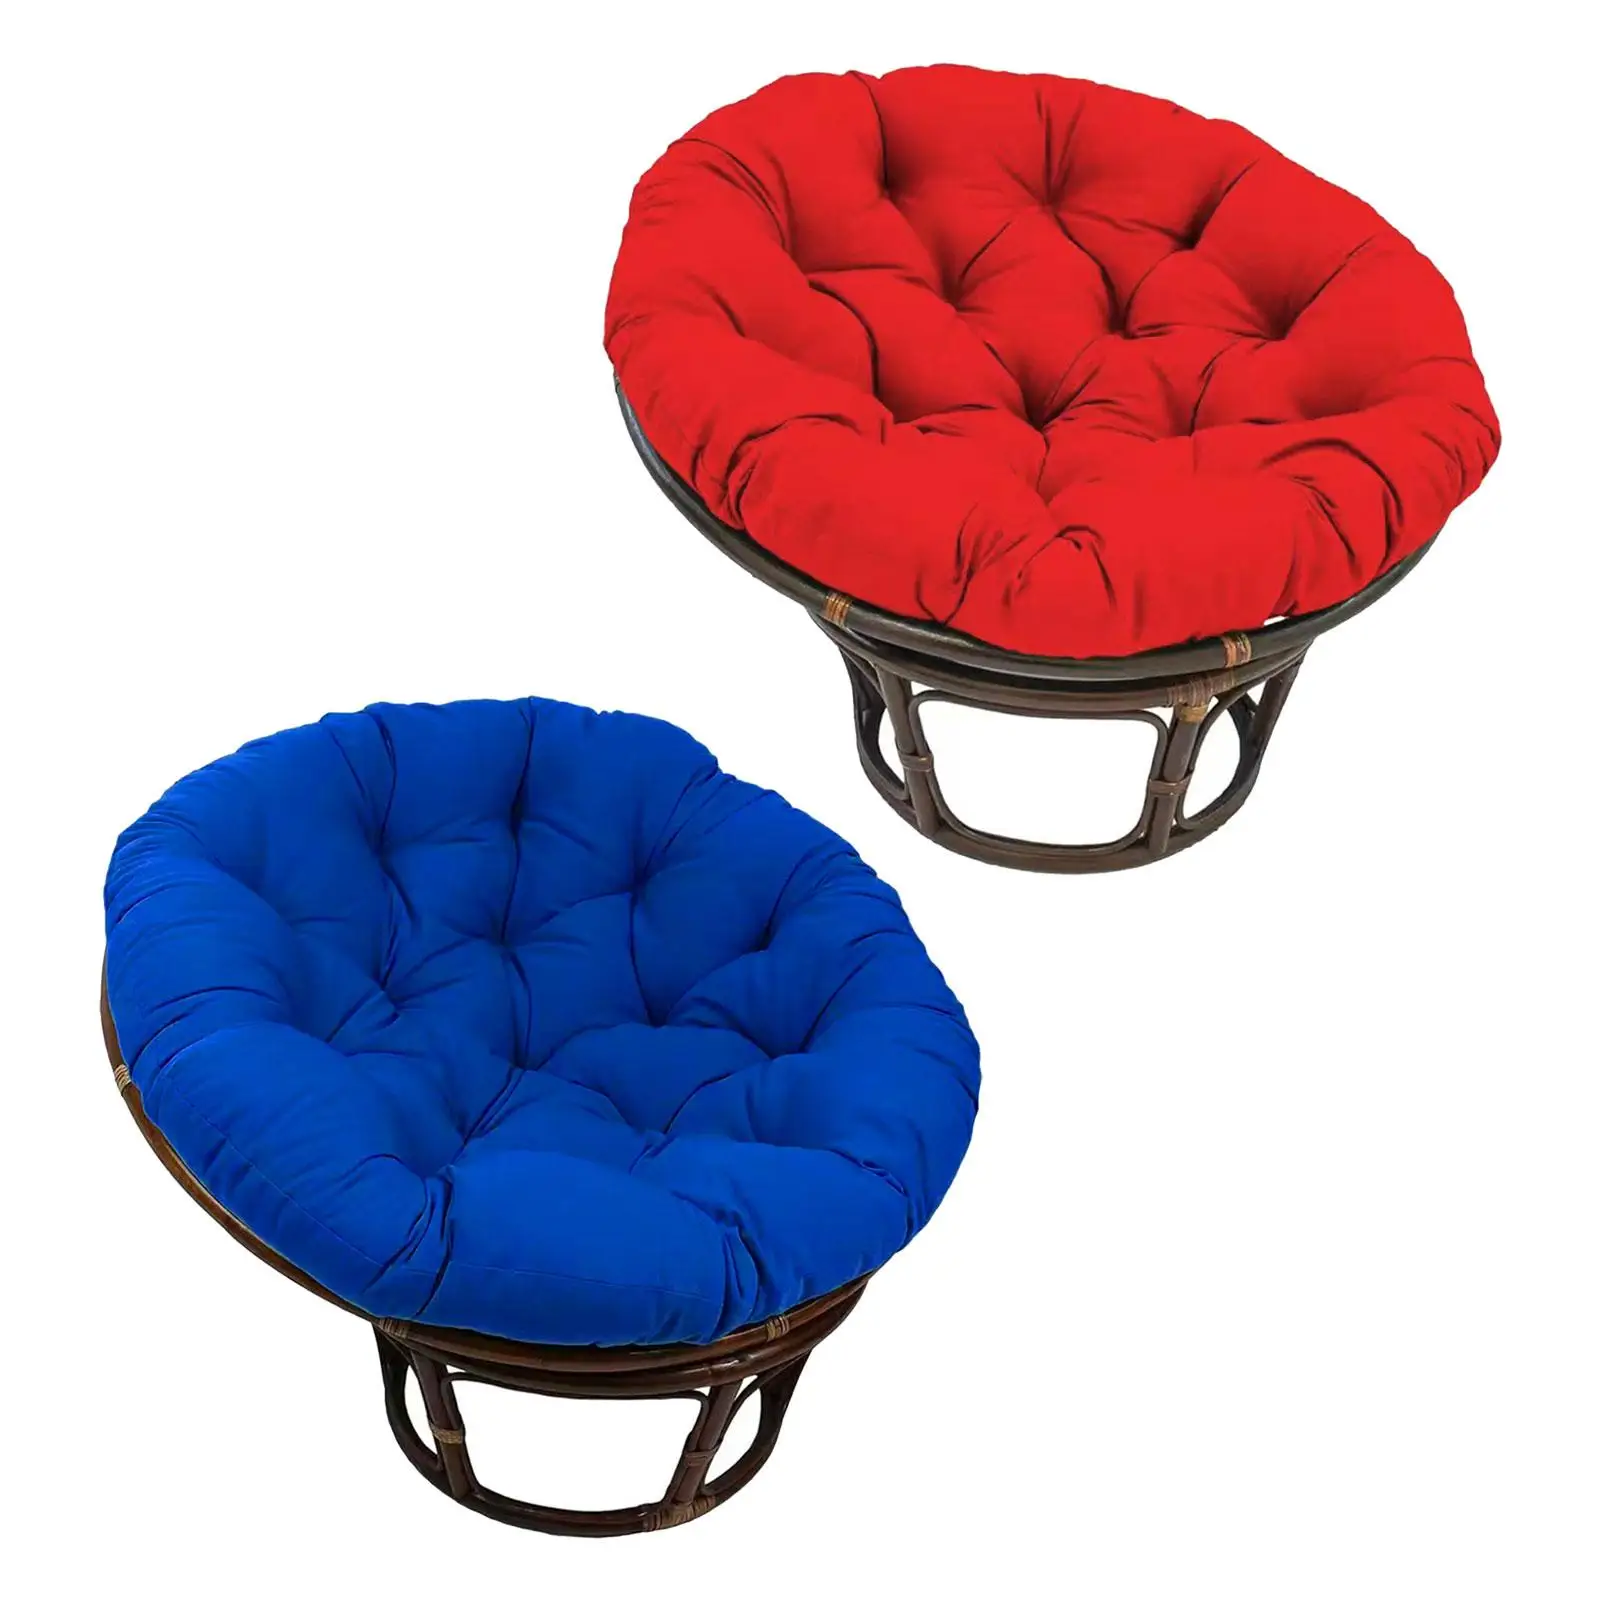 Egg Swing Chair Cushion Hanging Egg Chair Cushion Thickened Overstuffed Round Cushion Hammock Chair Cushions for Hanging Baskets